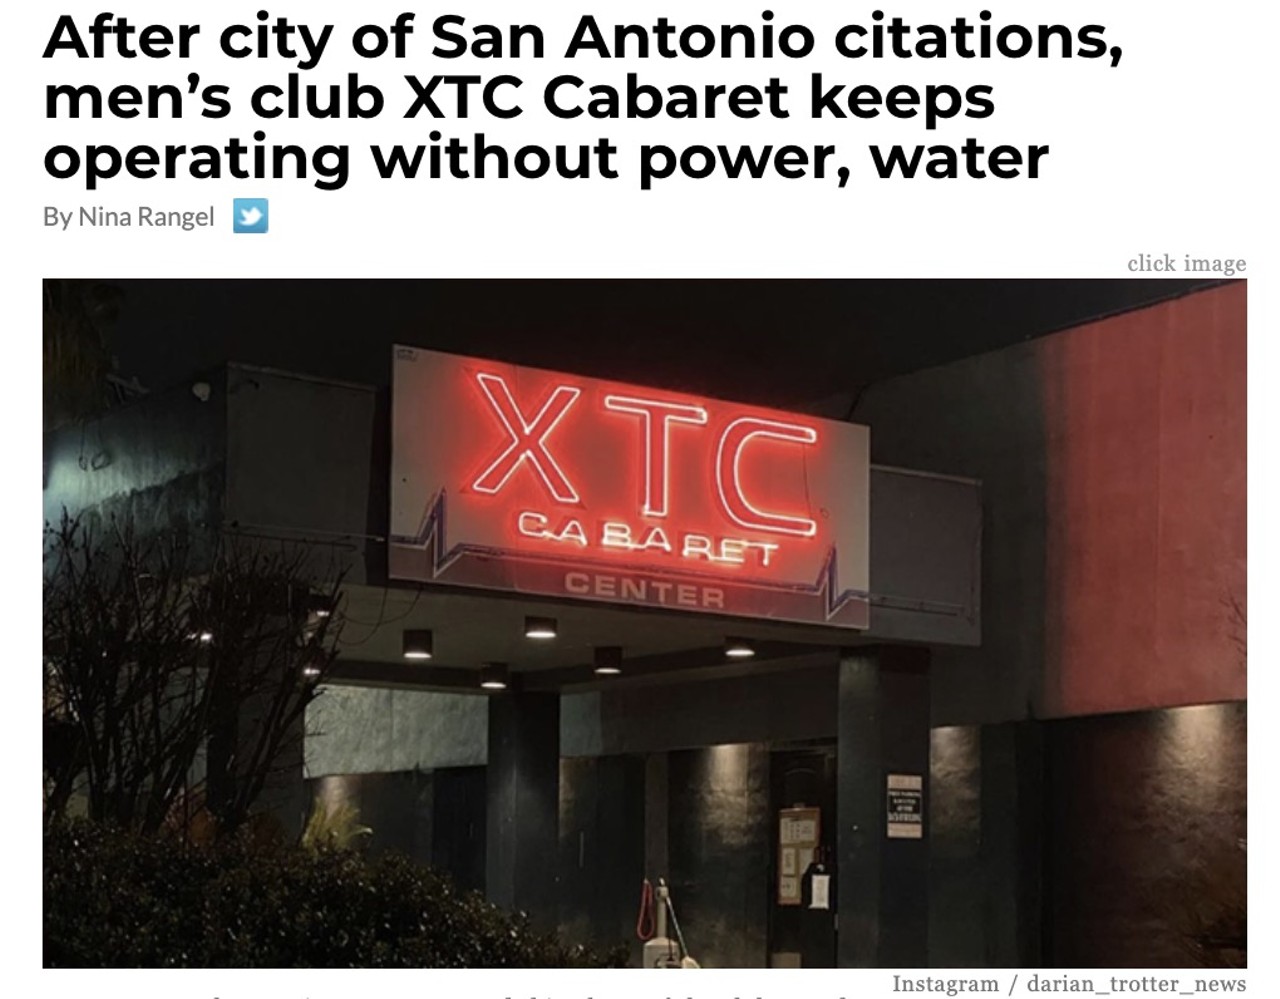 After city of San Antonio citations, men’s club XTC Cabaret keeps operating without power, water